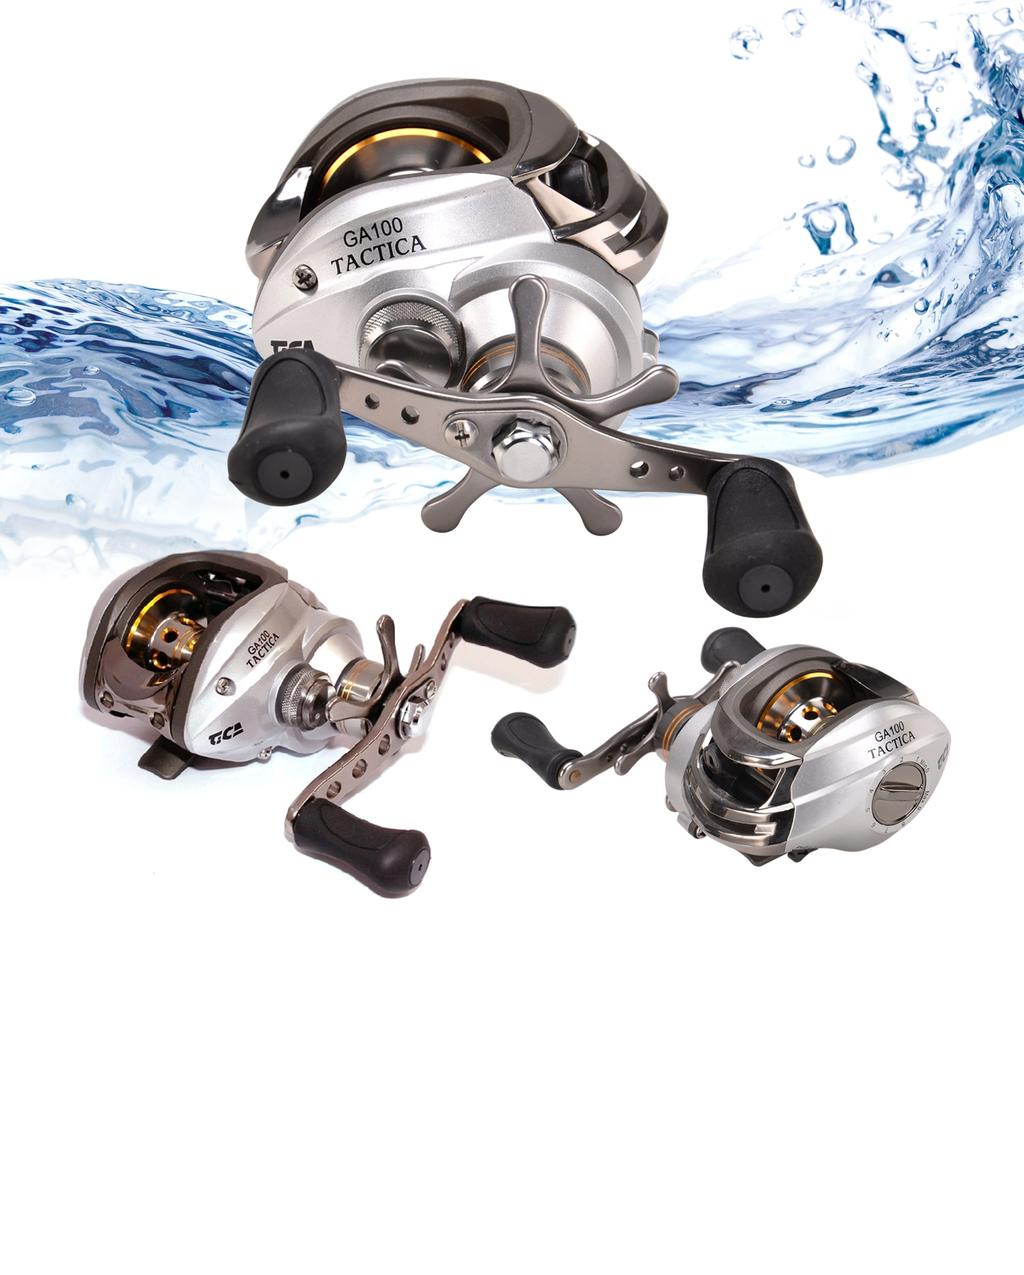 TiCA TACTICA BAITCASTER Features: The TiCA Tactica GA0 is a quality baitcasting reel with today's top features and a down-to-earth price. With blazing 6.